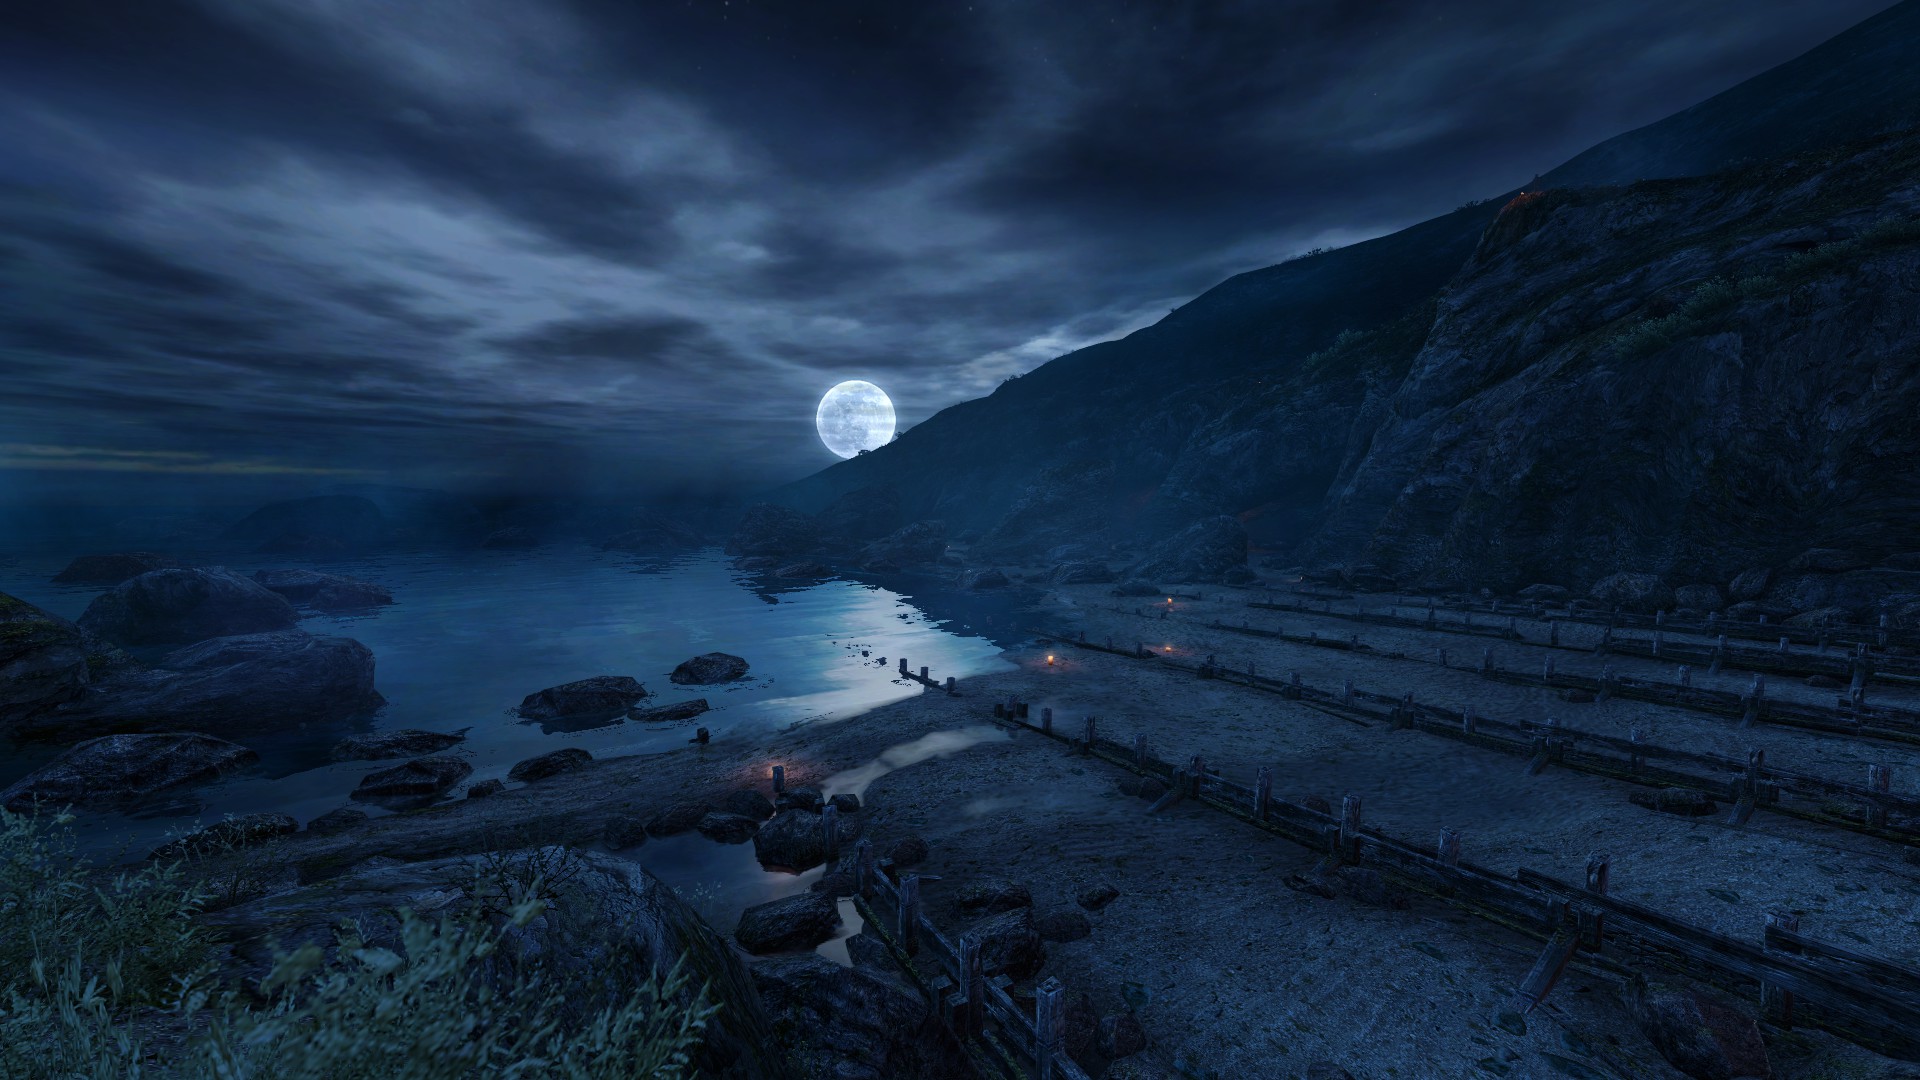 Dear Esther from The Chinese Room was a pioneer of sorts for the 'walking simulator' genre.